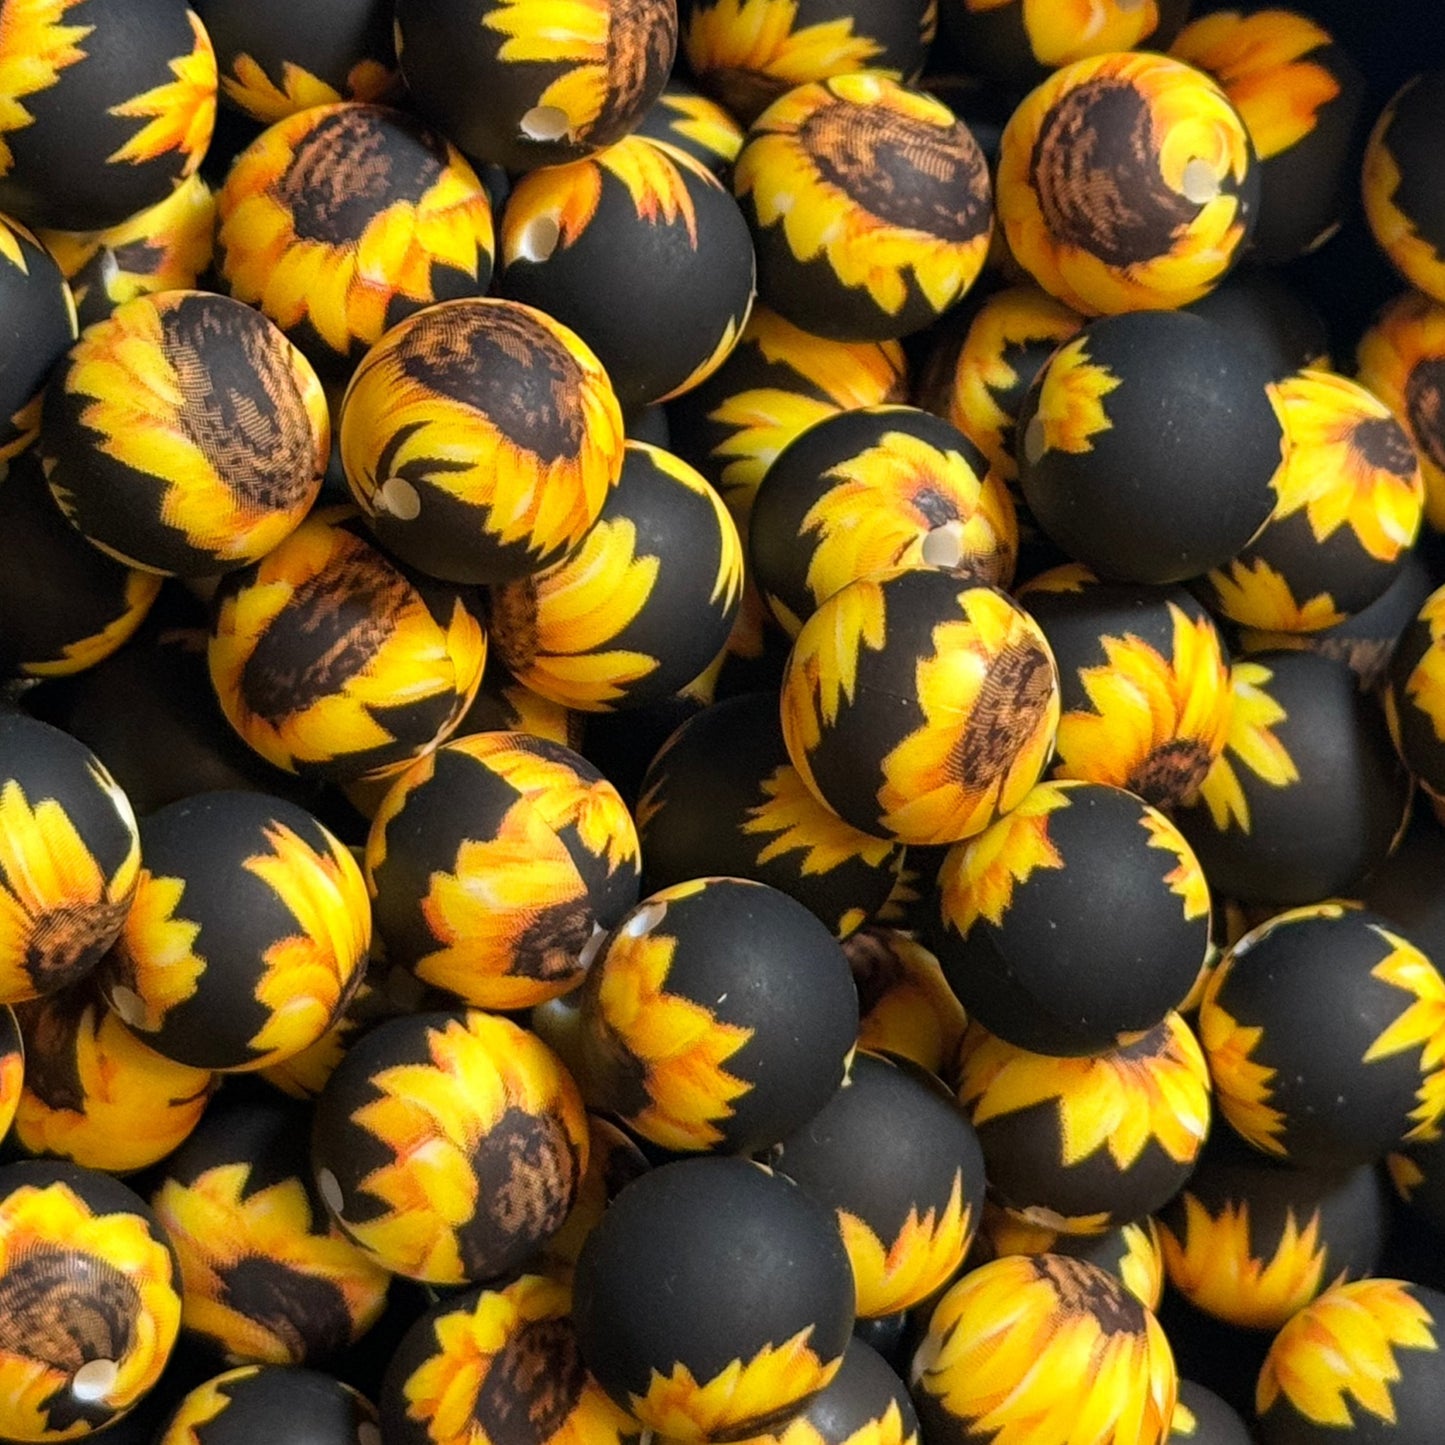 15mm Sunflowers on Black Silicone Bead